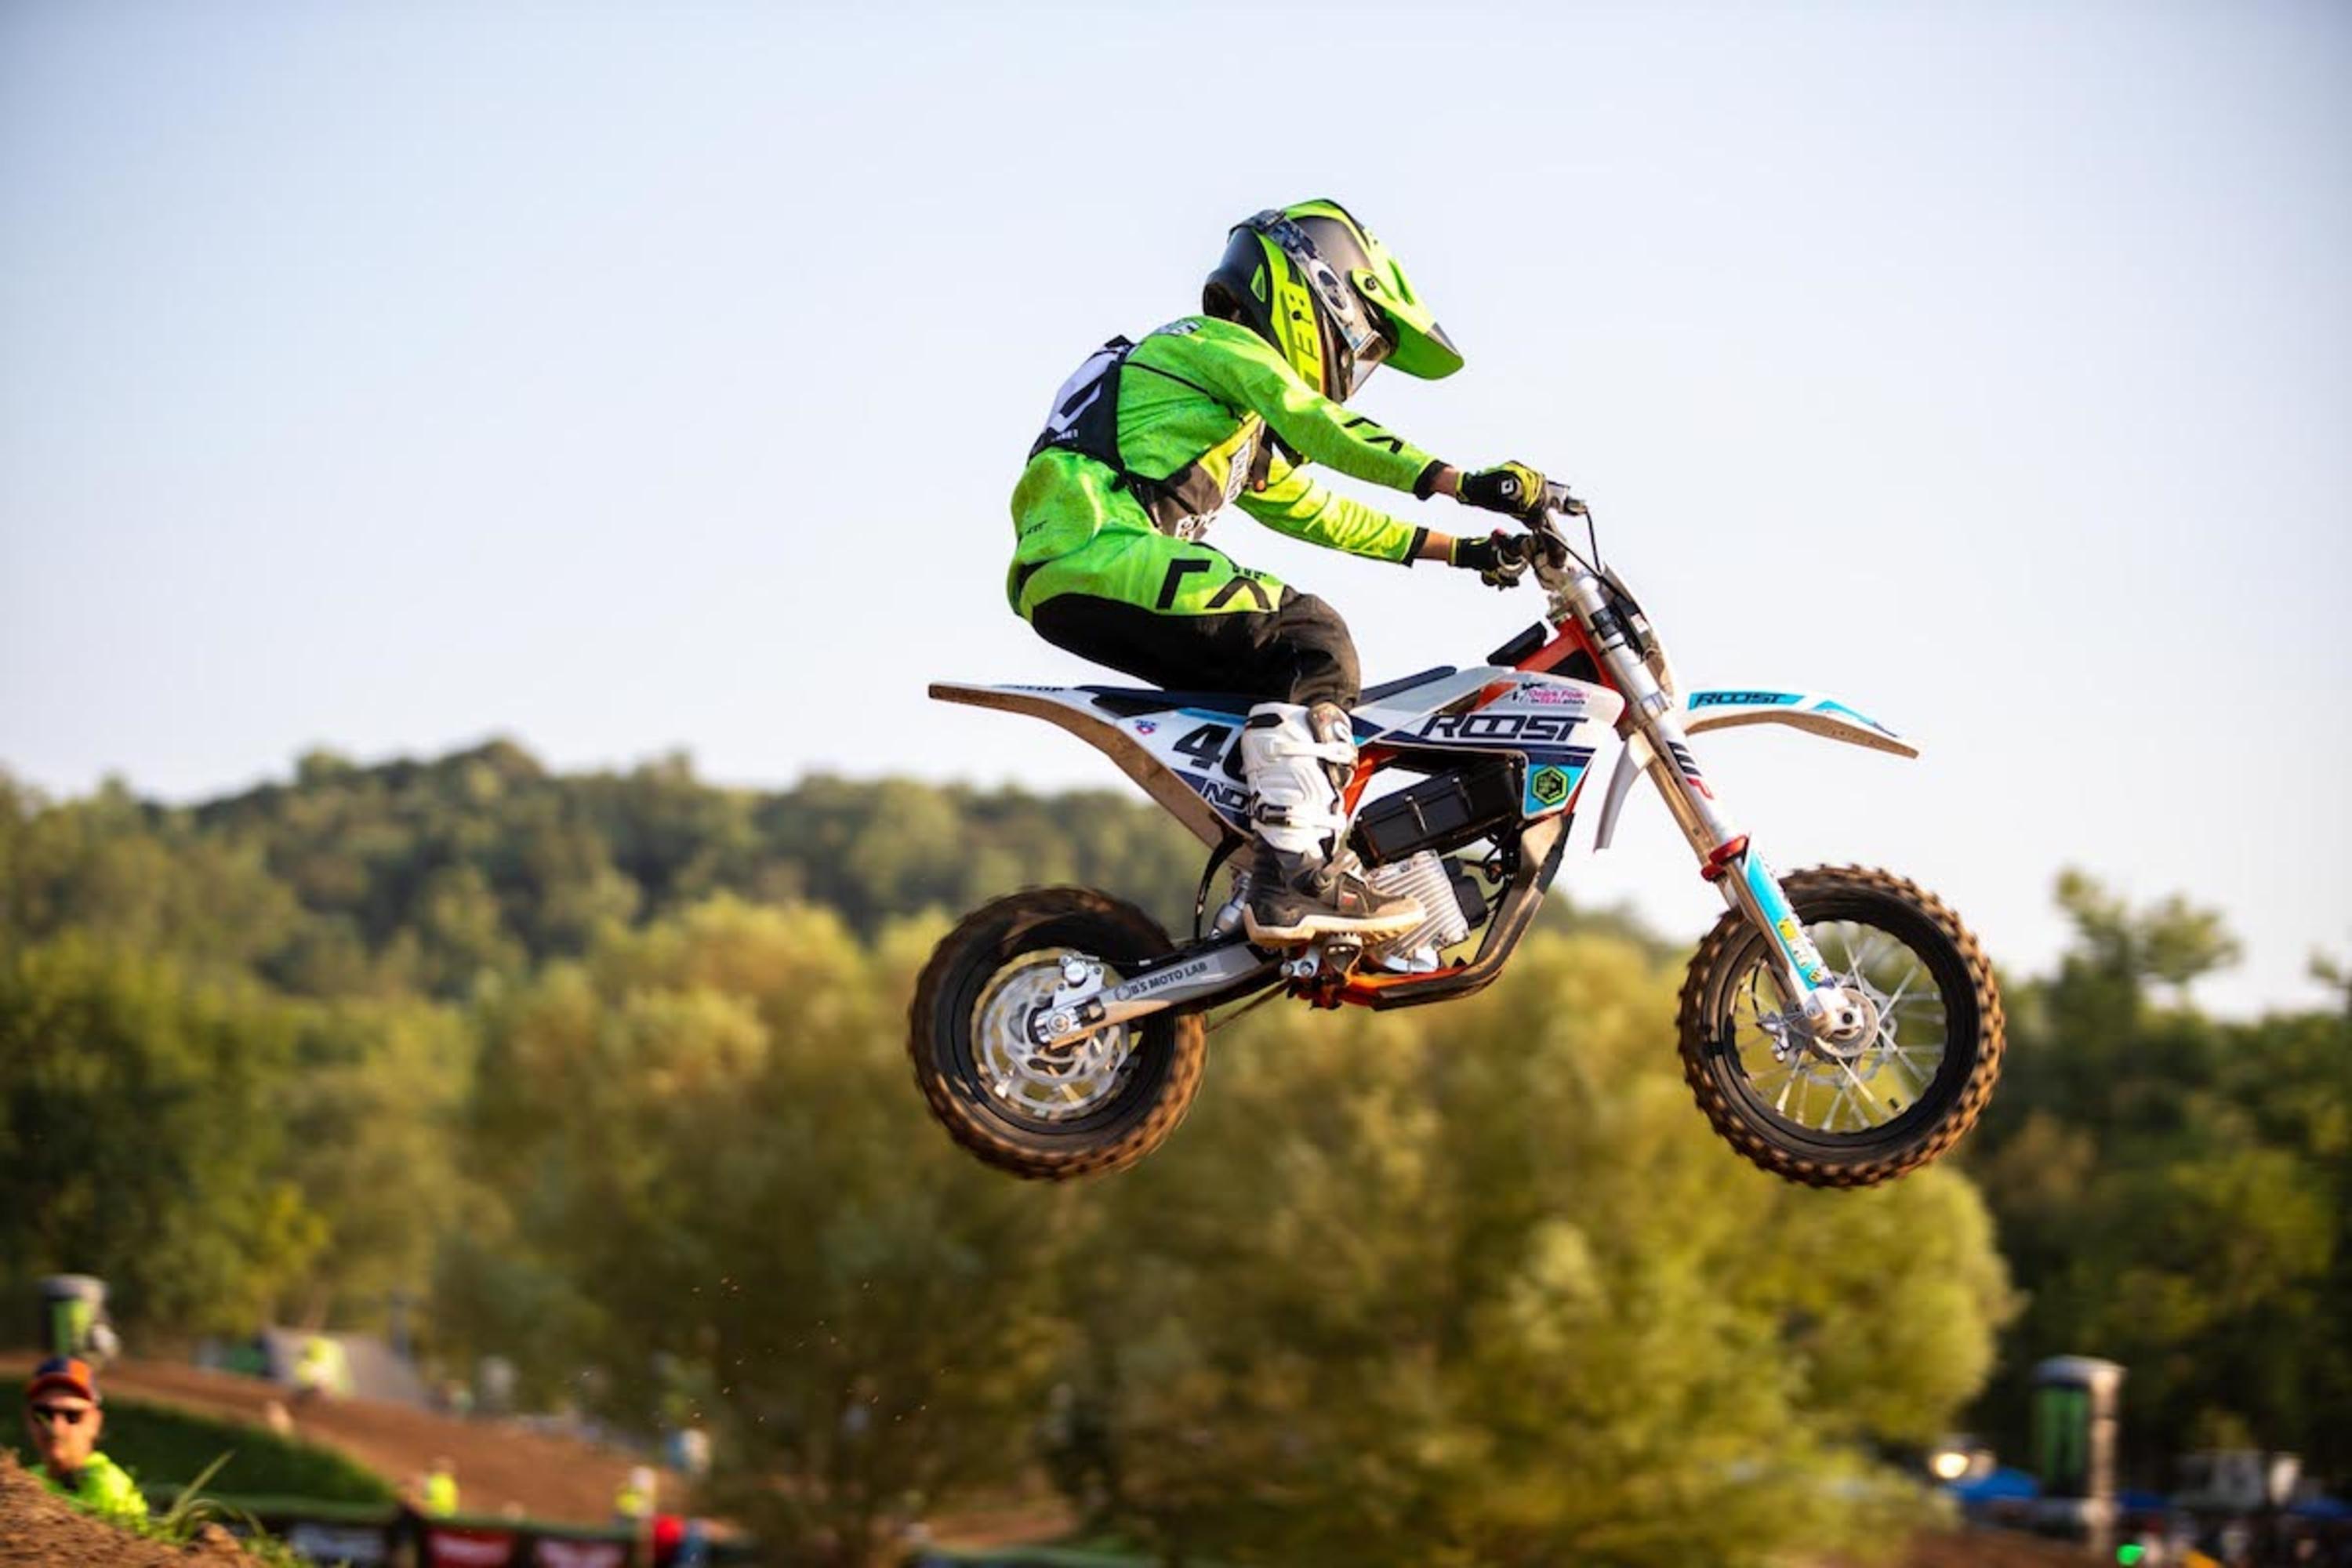 Second Day of Action from AMA Amateur National Motocross Championship Showcases the Stars of the Future